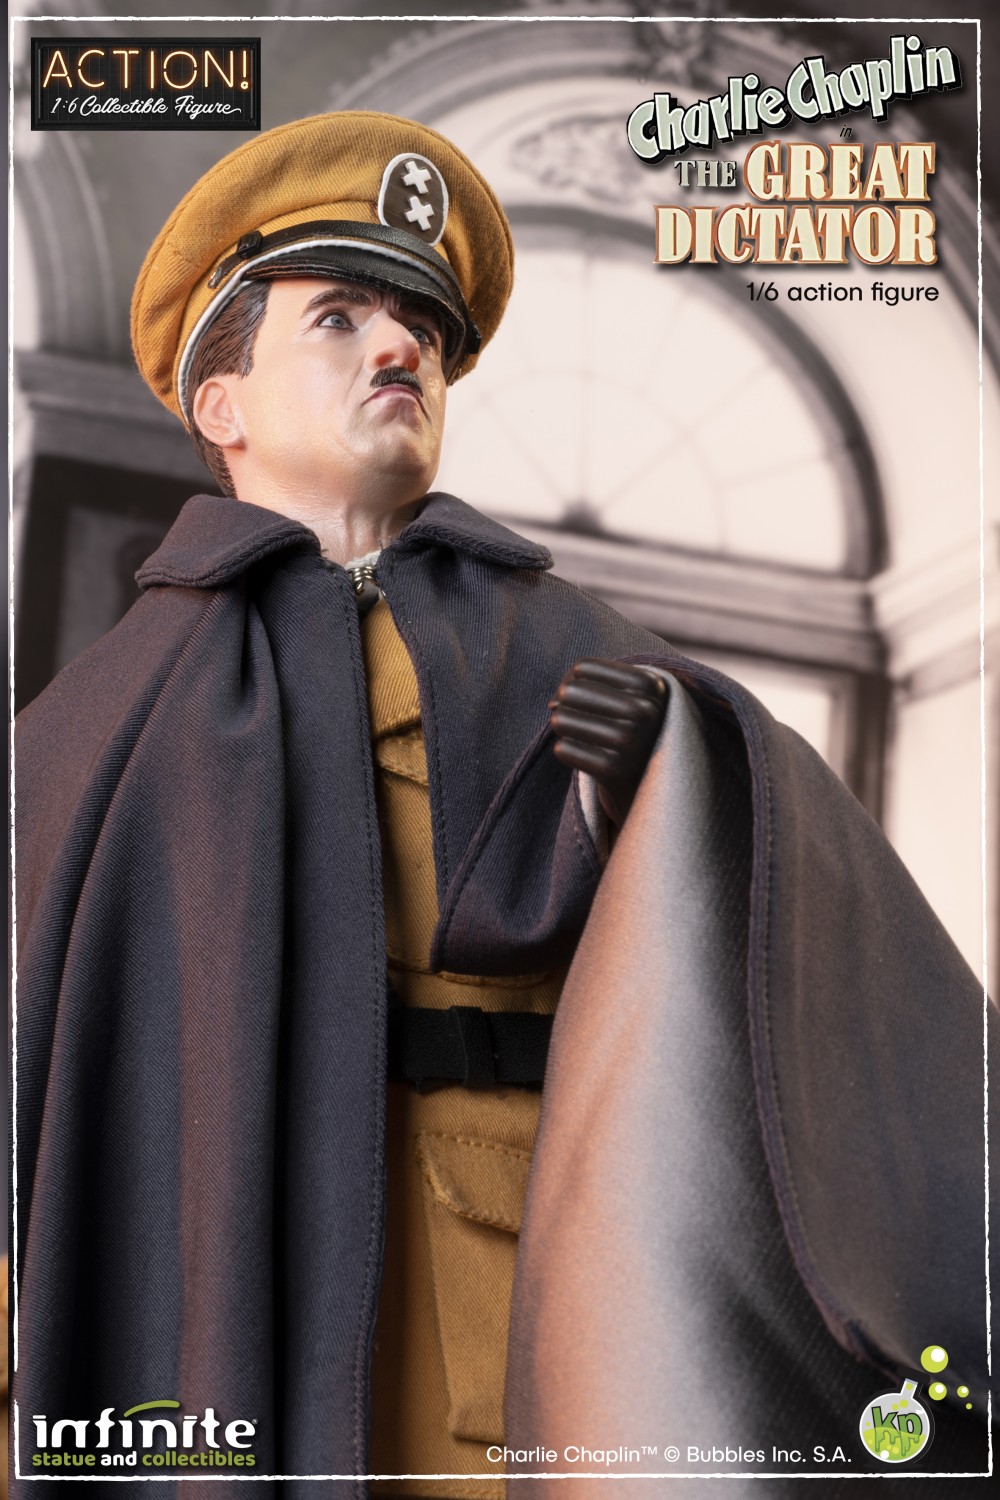 NEW PRODUCT: Infinite Statue & Kaustic Plastik: CHARLIE CHAPLIN “THE GREAT DICTATOR”  1/6 ACTION FIGURE 5581